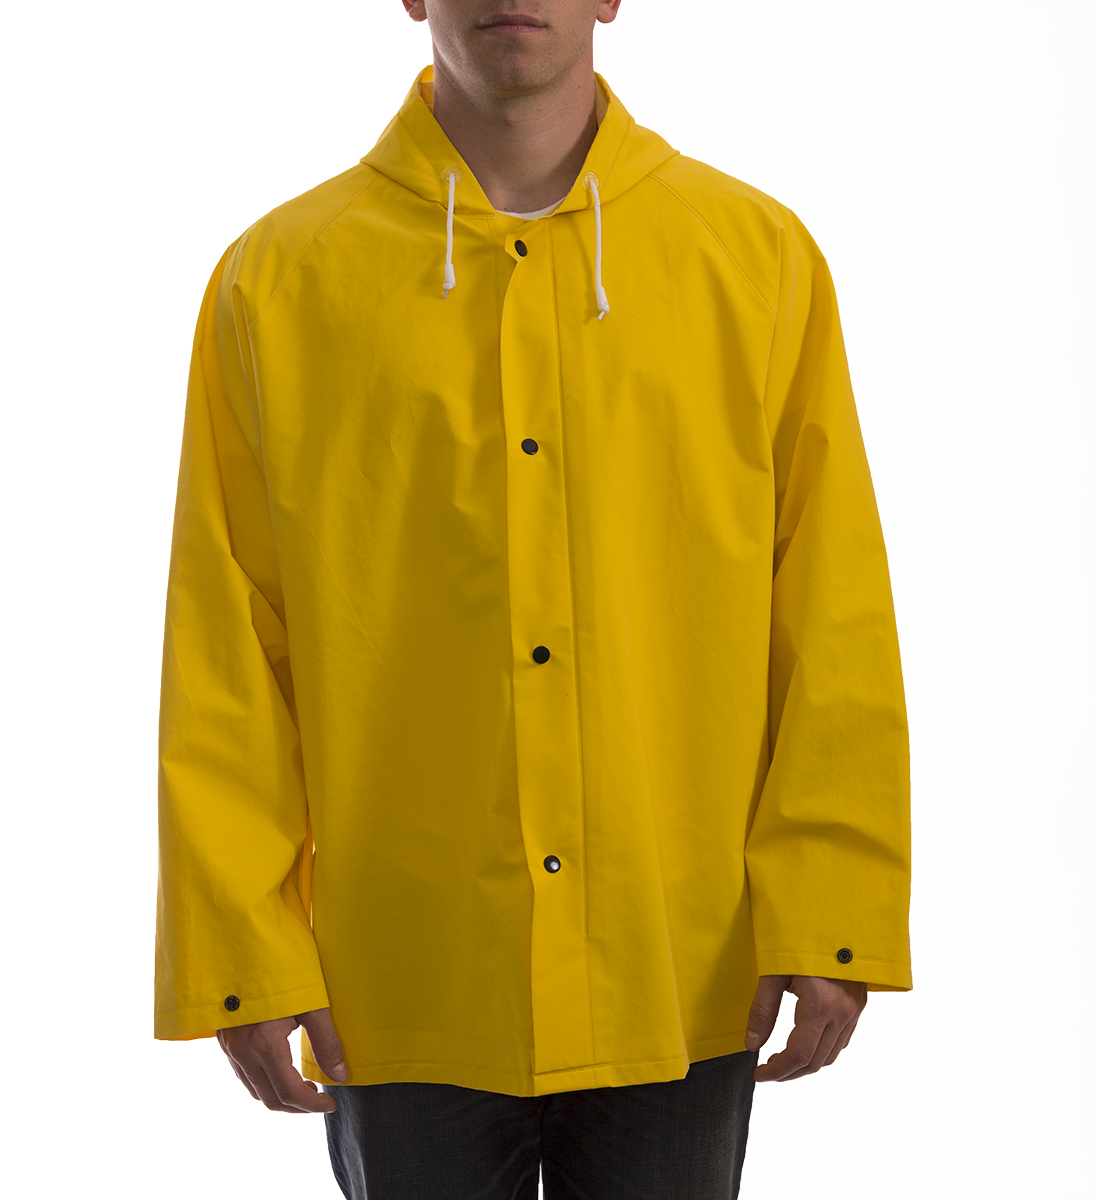 Industrial Yellow Work Jacket with Attached Hood